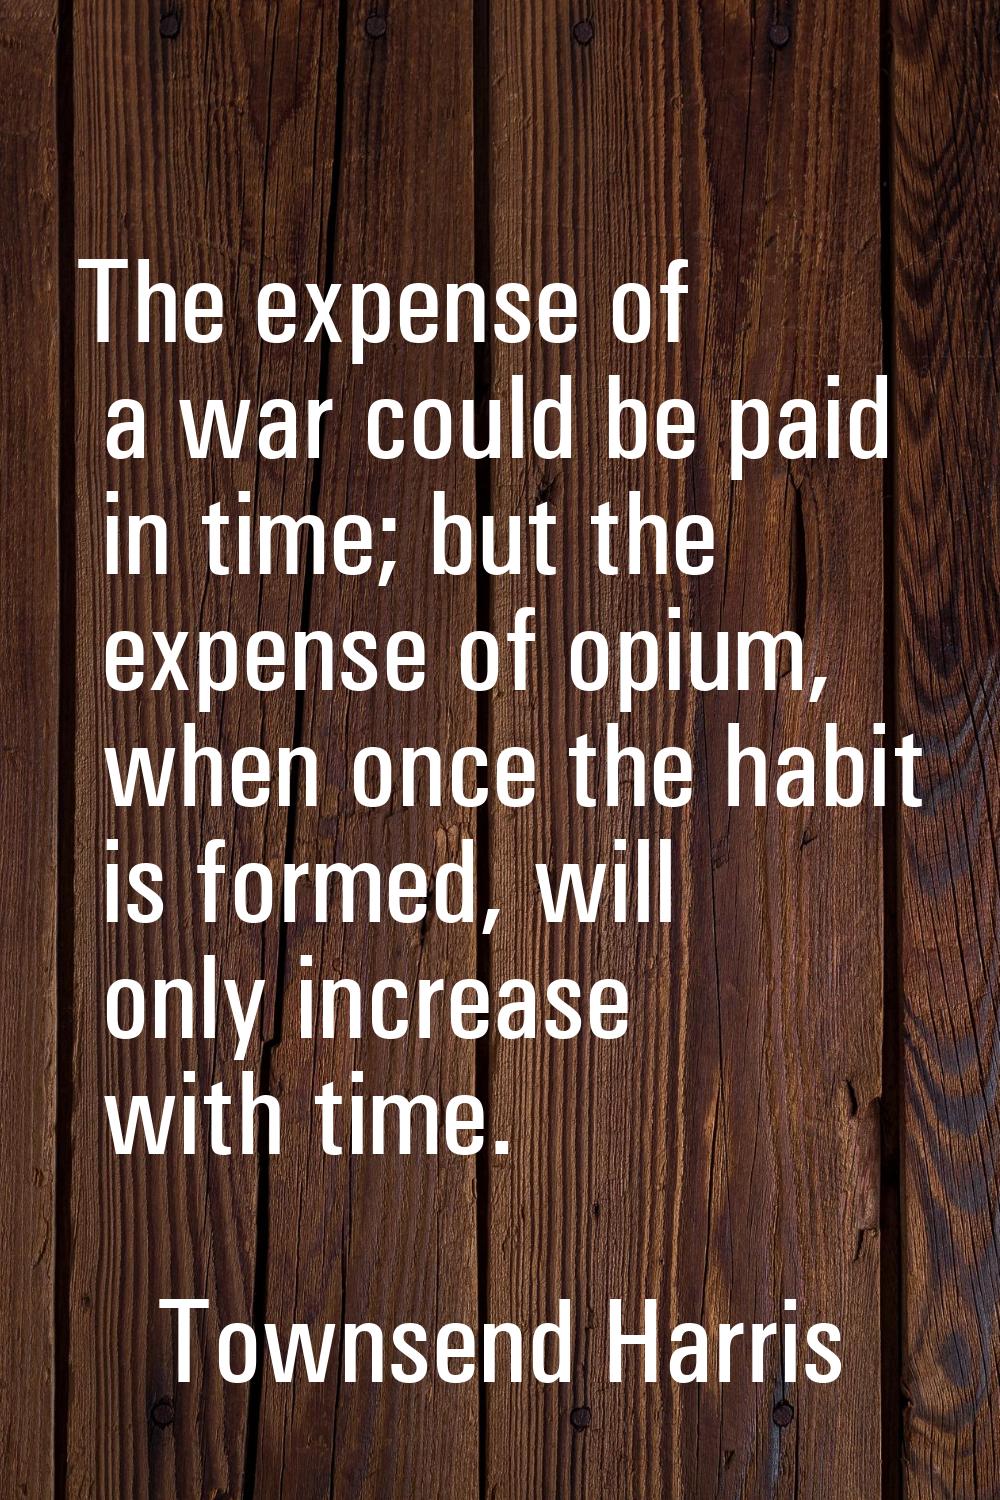 The expense of a war could be paid in time; but the expense of opium, when once the habit is formed